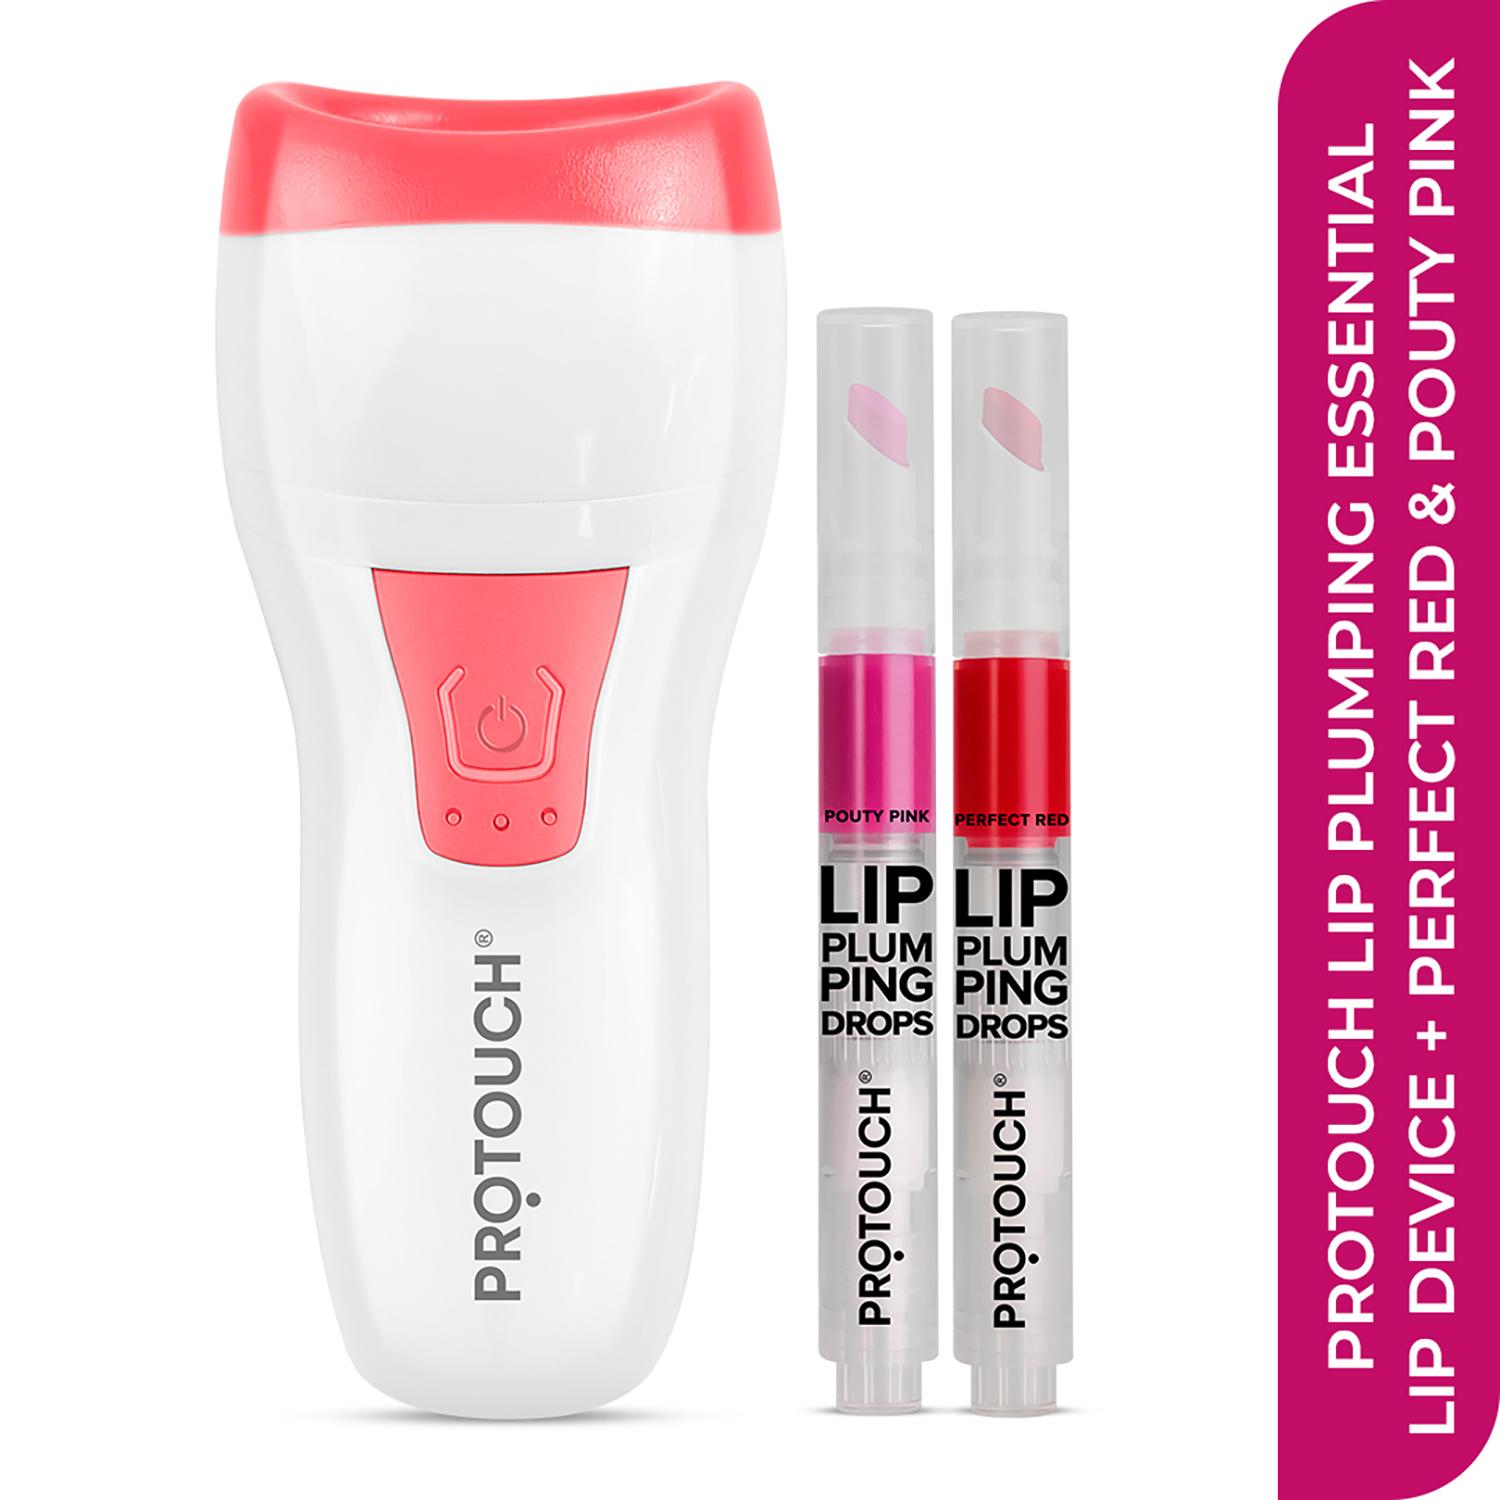 Protouch | PROTOUCH Red & White Pro Lips Lip Plumper Device, Lip Plumping drops (Red and Pouty Pink) Combo